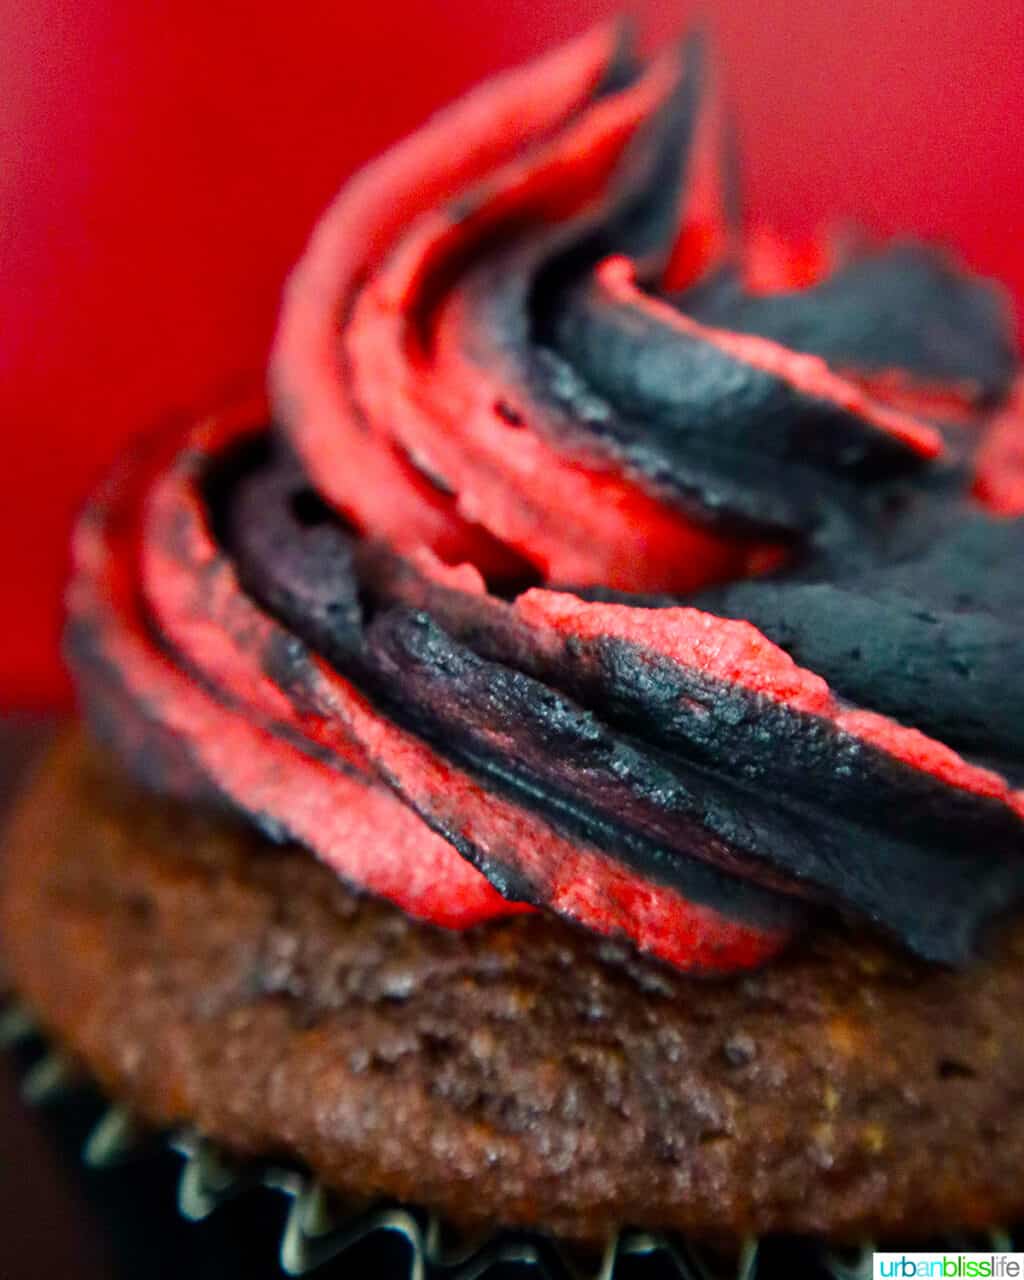 Darth Vader red and black frosted Devil's Food cupcakes.